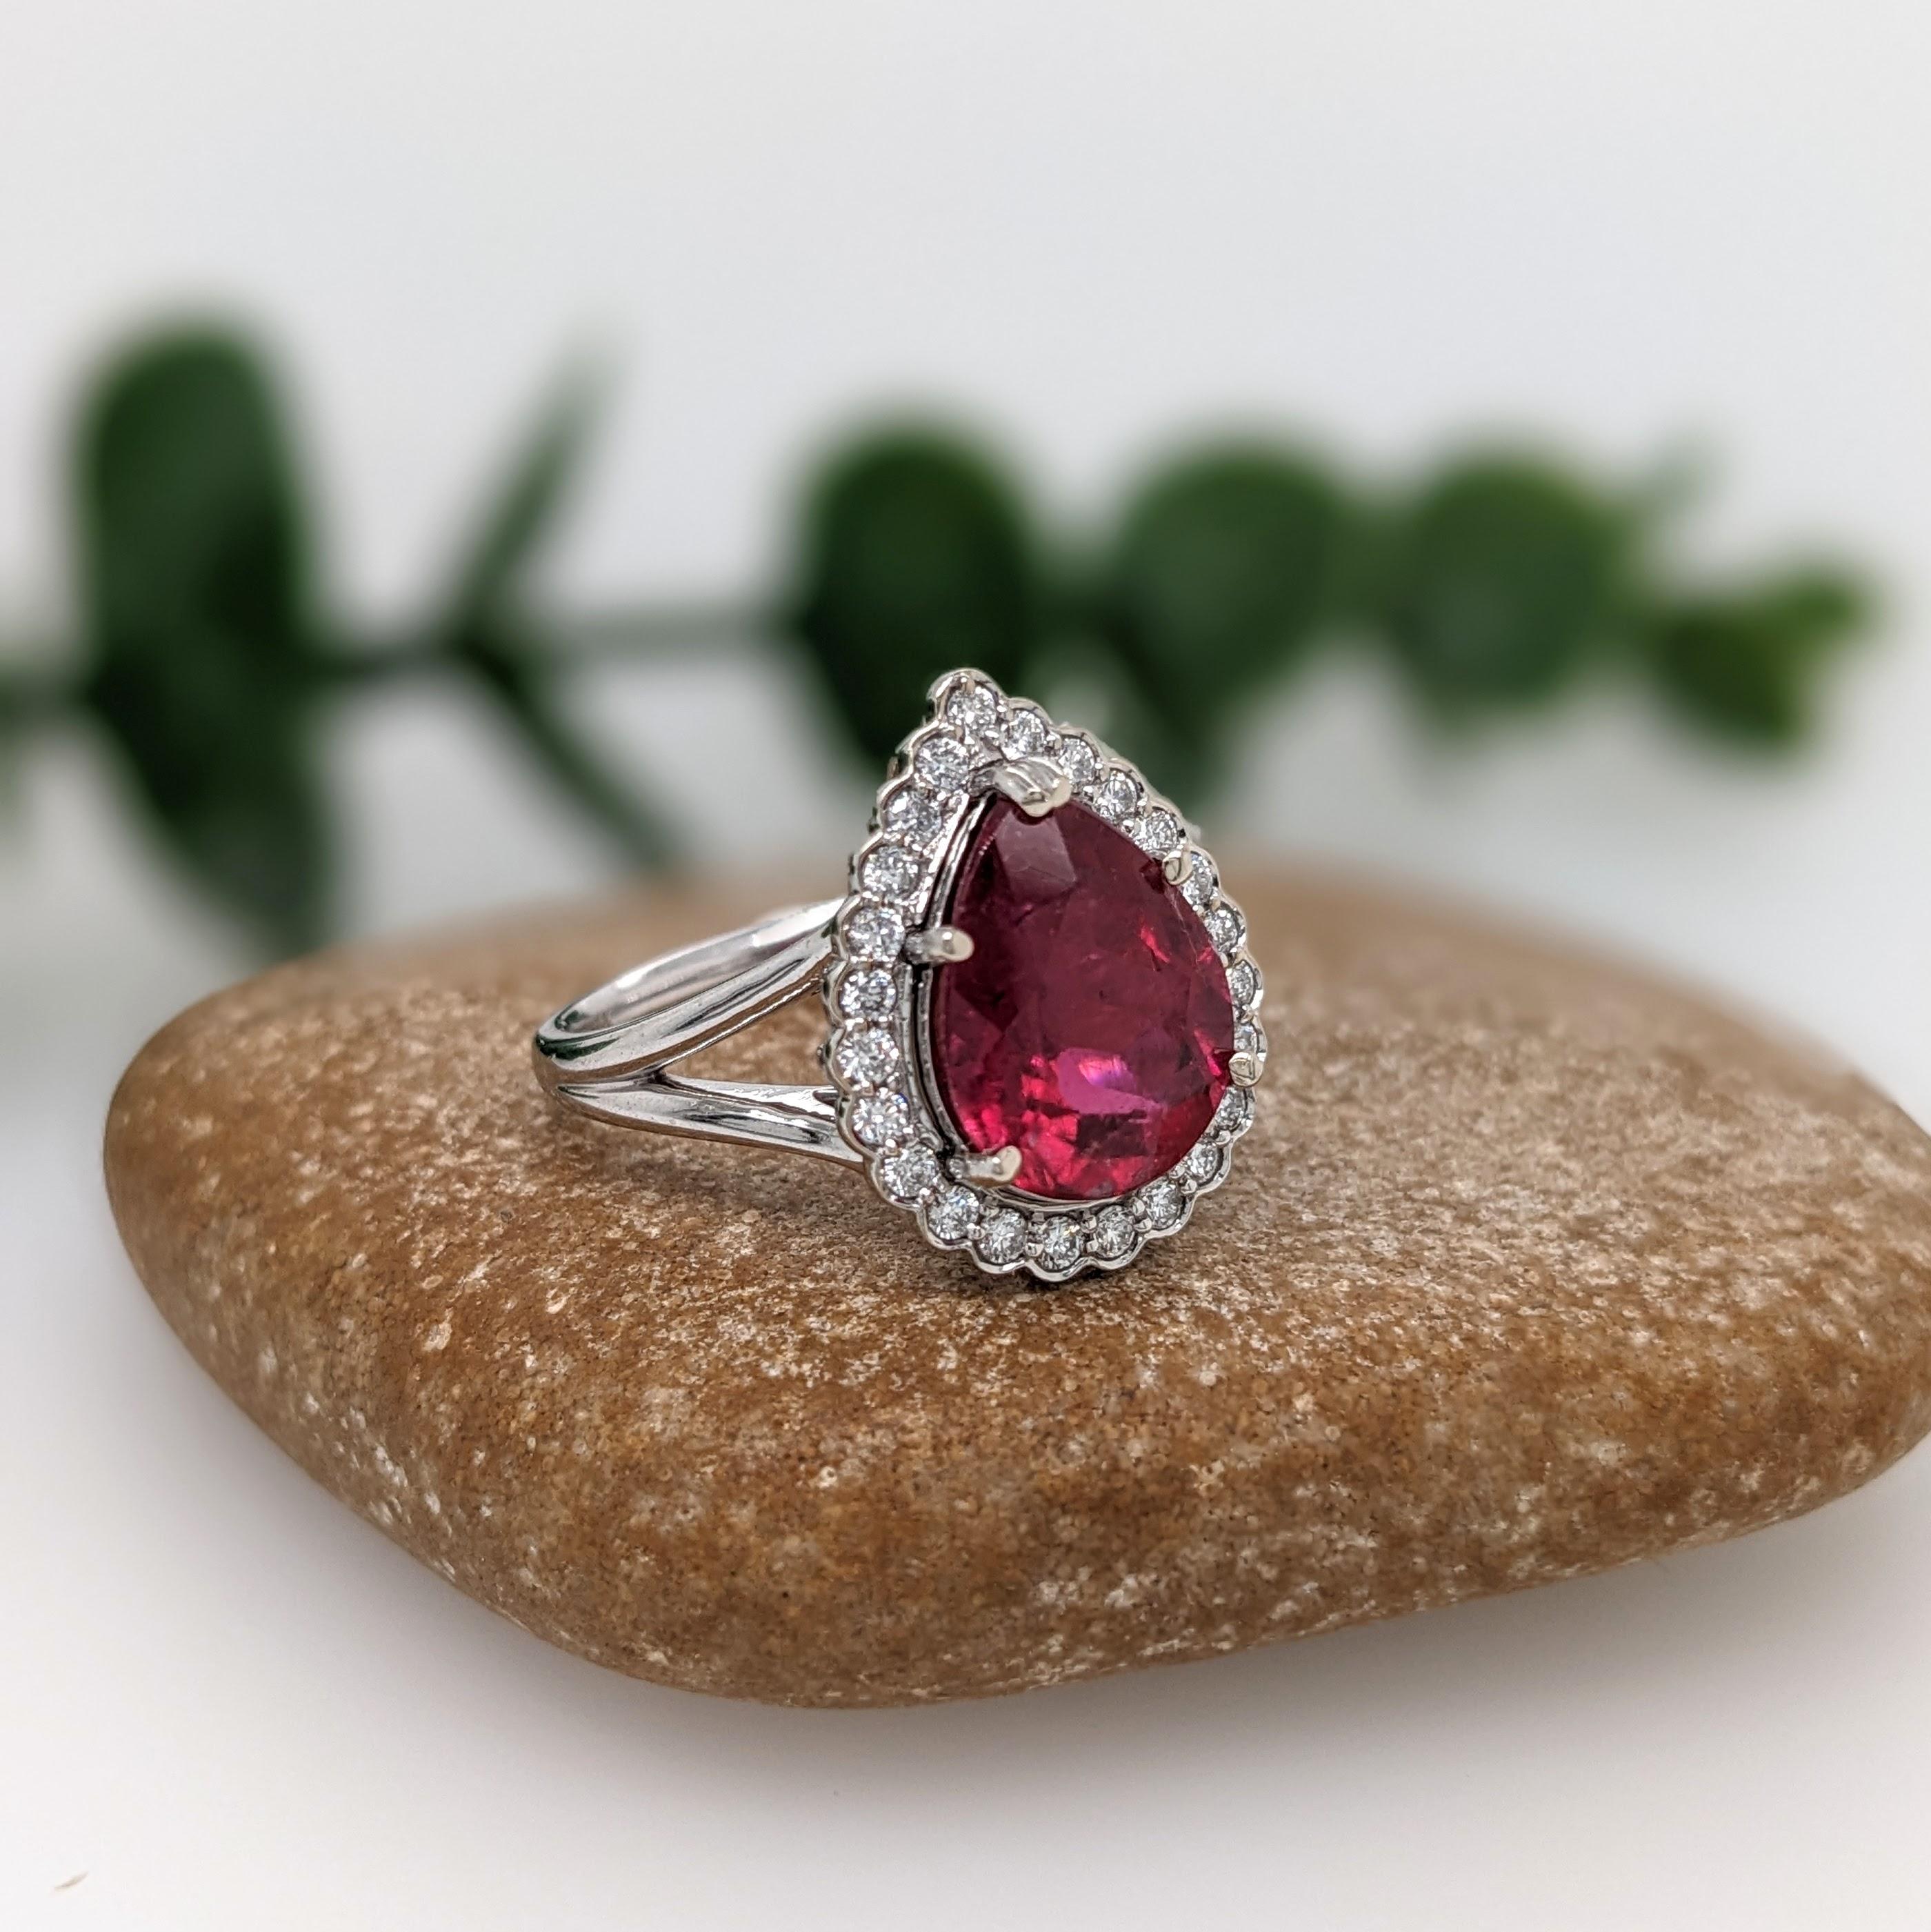 3.4ct Rubellite Tourmaline Ring w Earth Mined Diamonds in Solid 14K Gold PR 11x9 For Sale 2